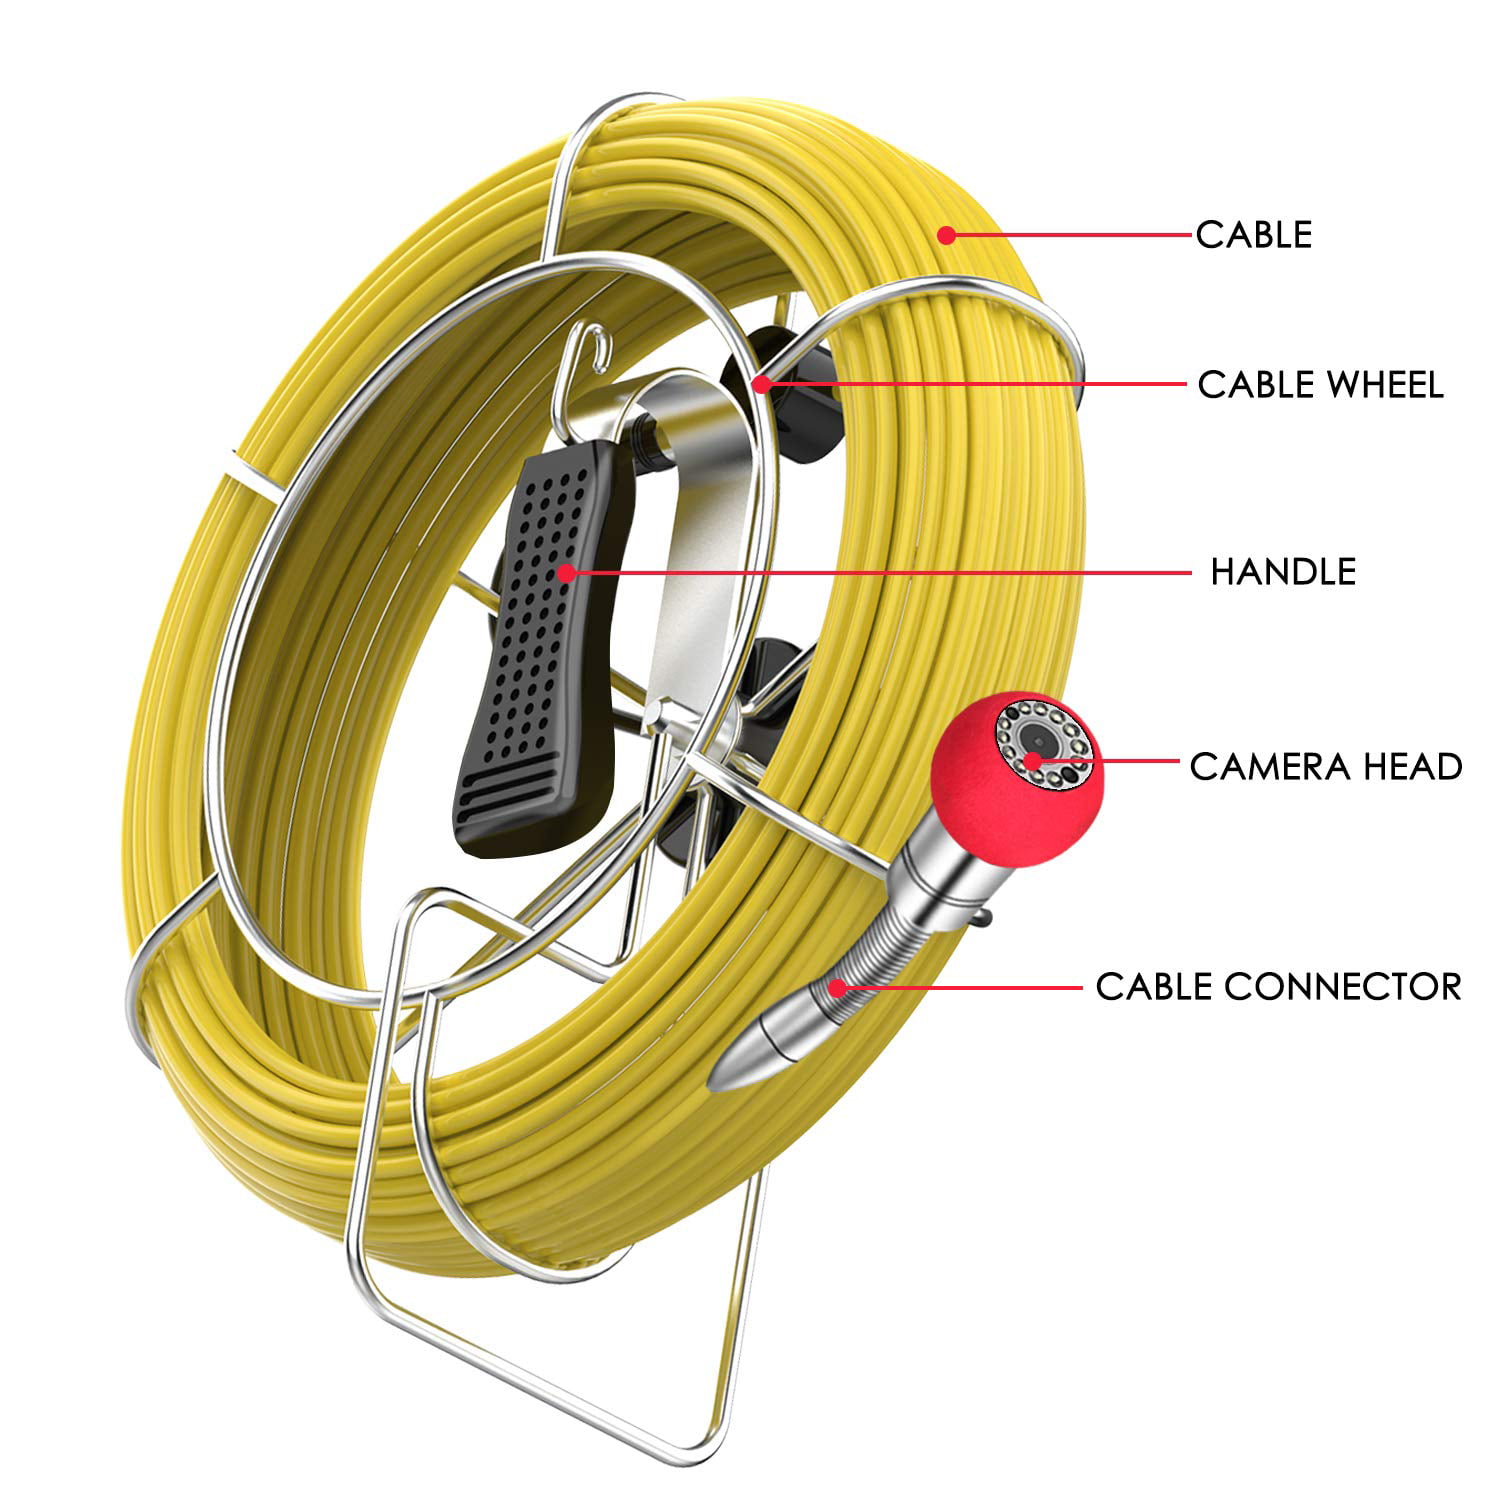 Pipe Inspection Camera,50M/165ft Sewer Camera Pipeline Drain Industrial Endoscope Waterproof IP68 Snake Video System with 7 Inch LCD Monitor 1000TVL Sony CCD DVR Recorder Pipe Cam 7D1-PC50M-With DVR